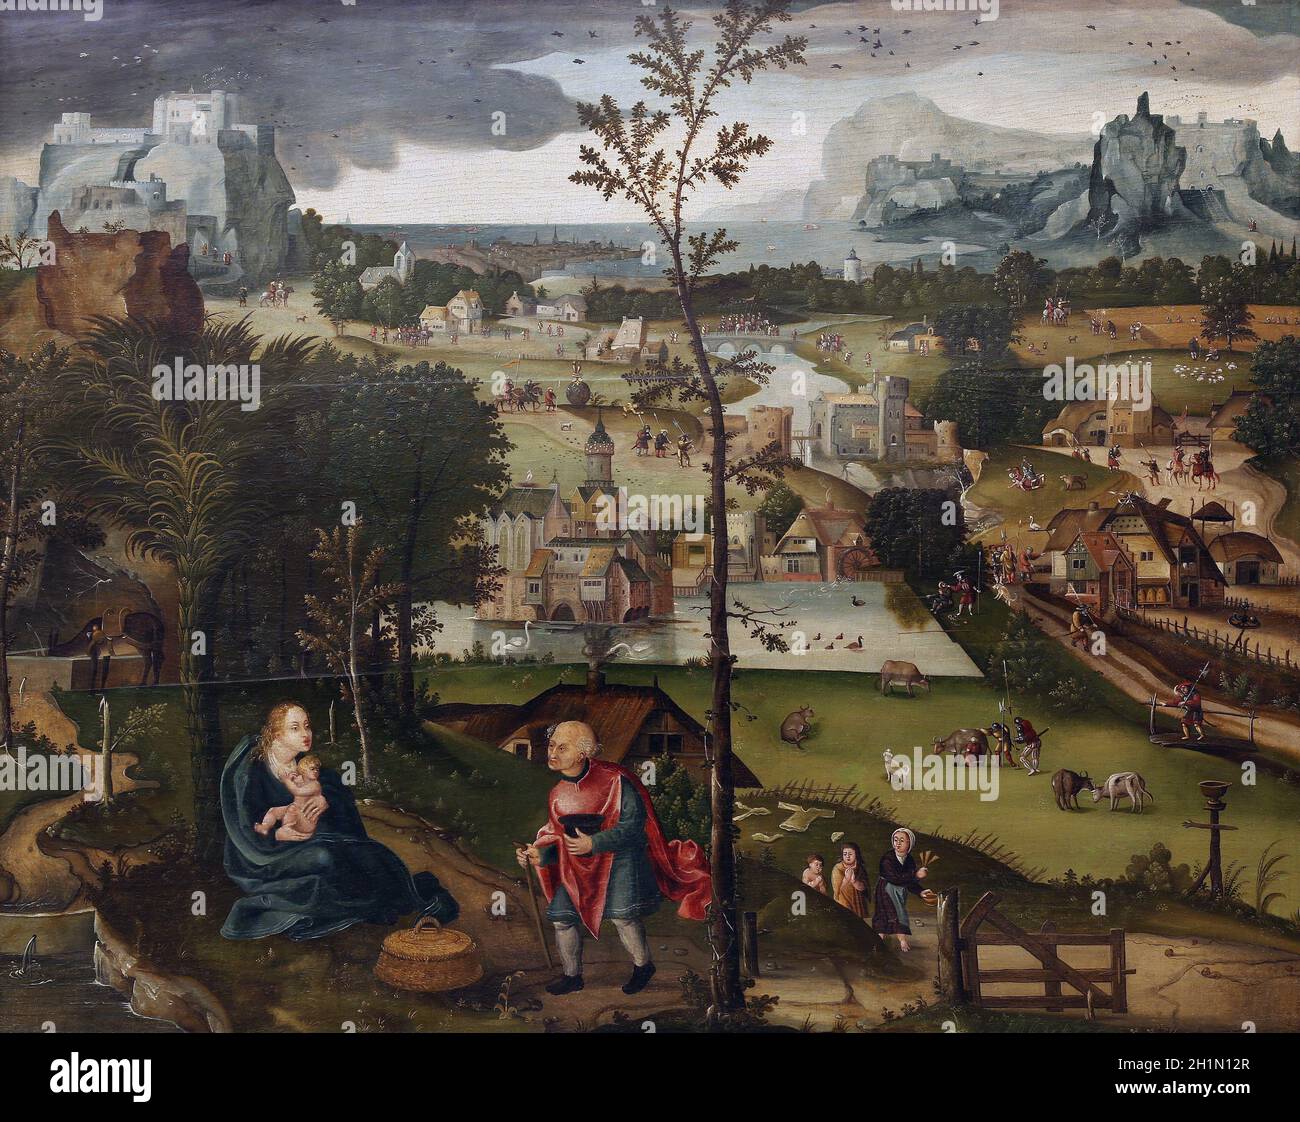 ZAGREB, CROATIA - DECEMBER 08: Joachim Patinir: The Flight into Egypt, Old Masters Collection, Croatian Academy of Sciences, December 08, 2014 in Zagr Stock Photo